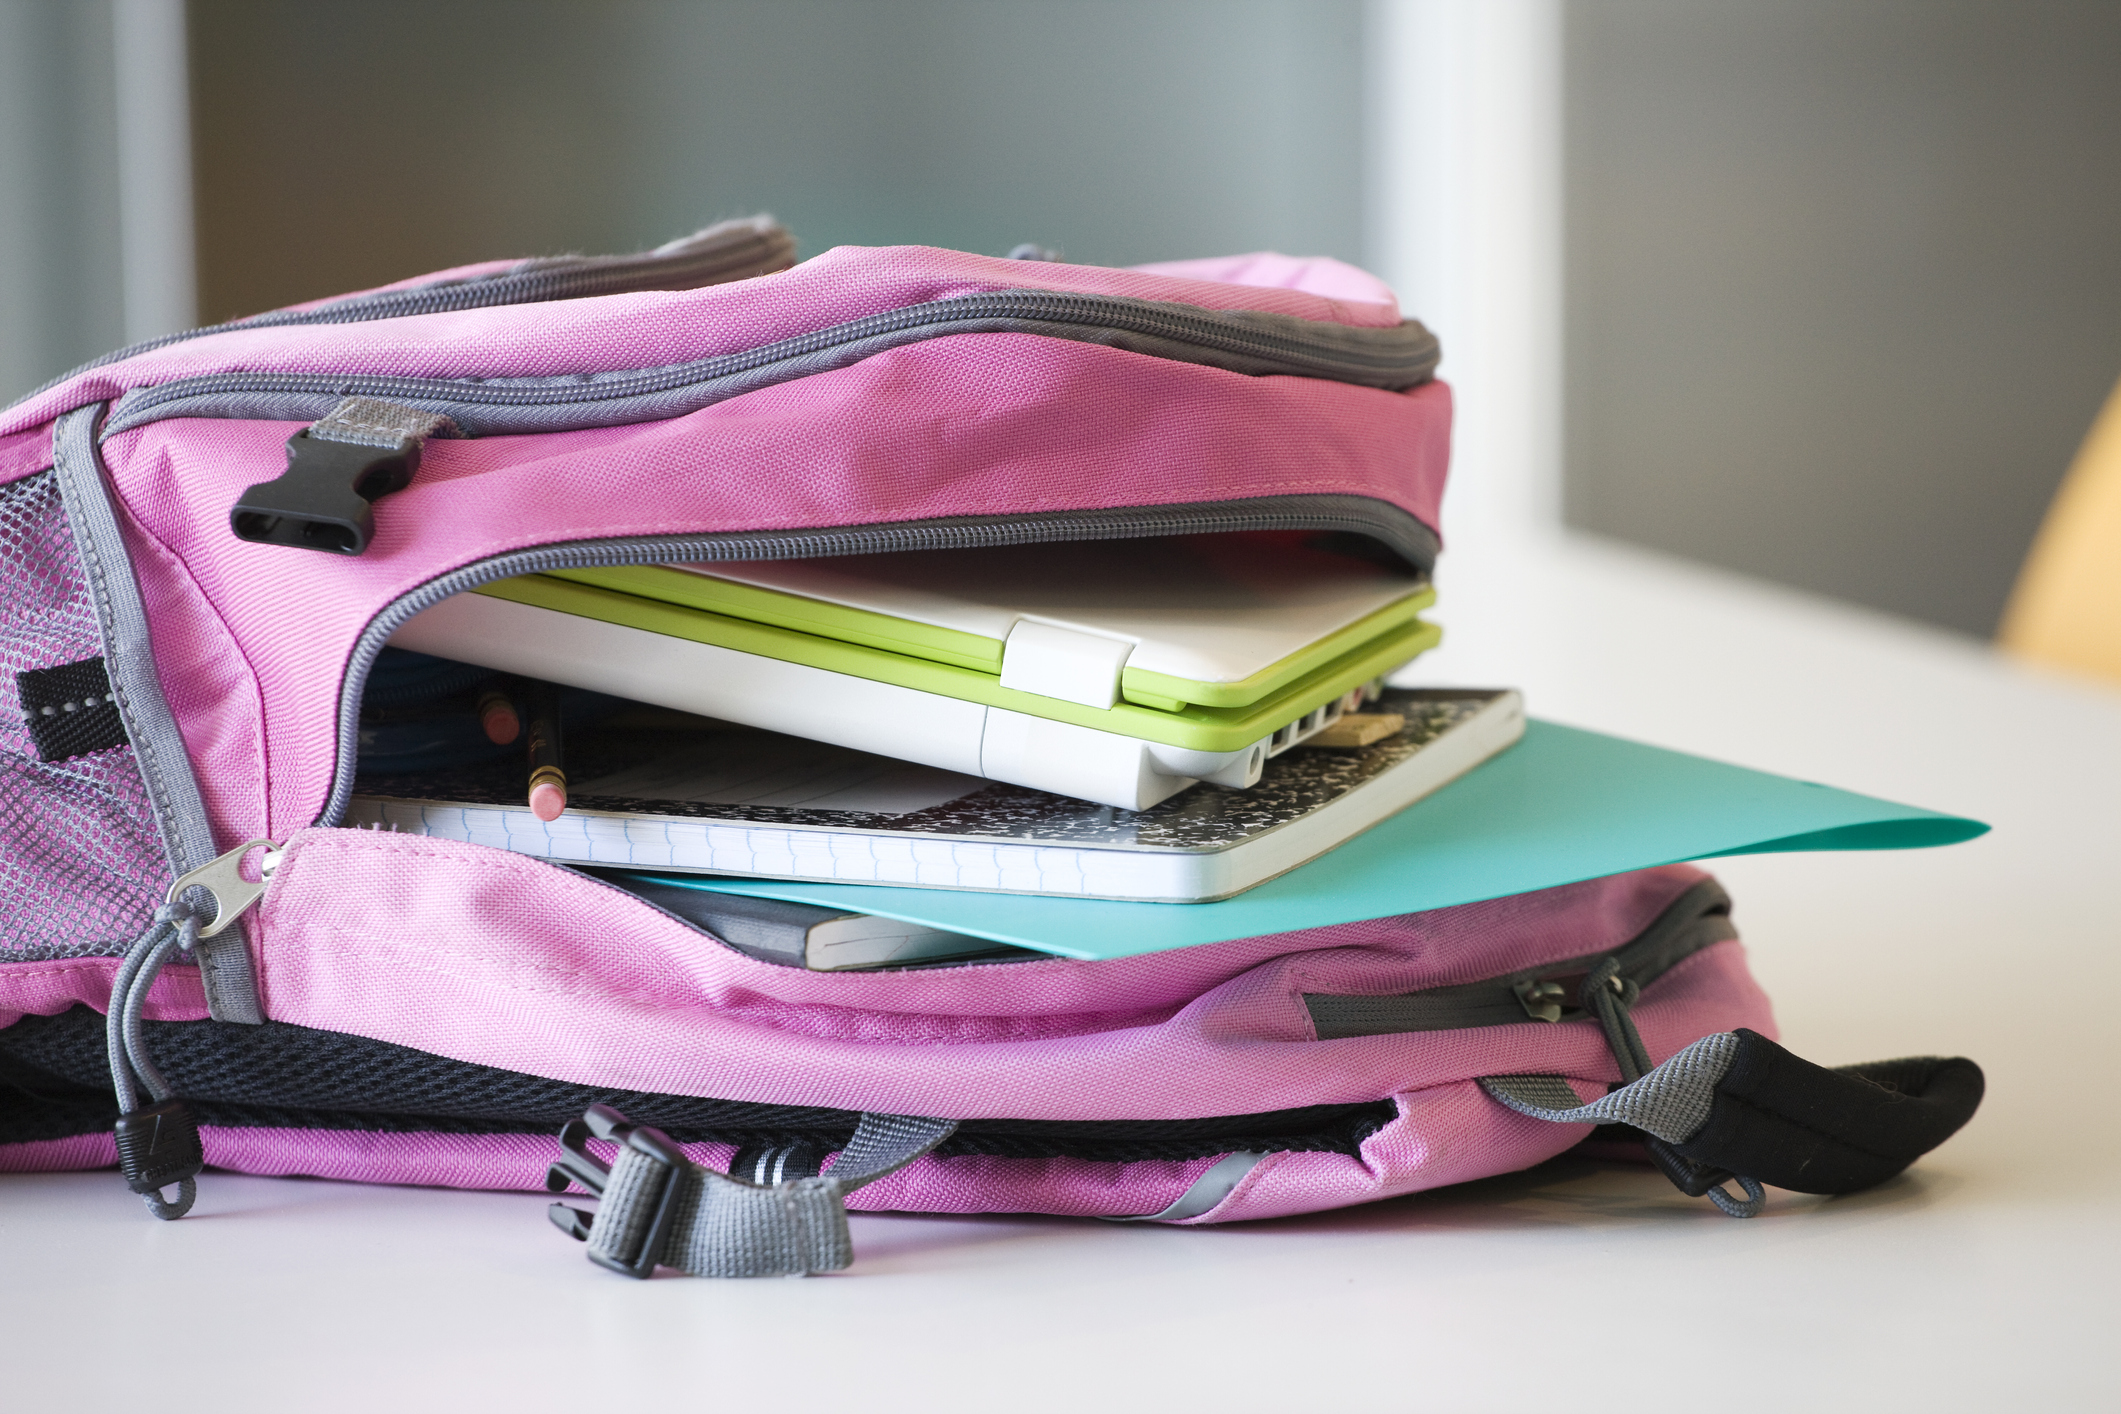 Pink bookbag with laptop and notebooks inside - stock photo